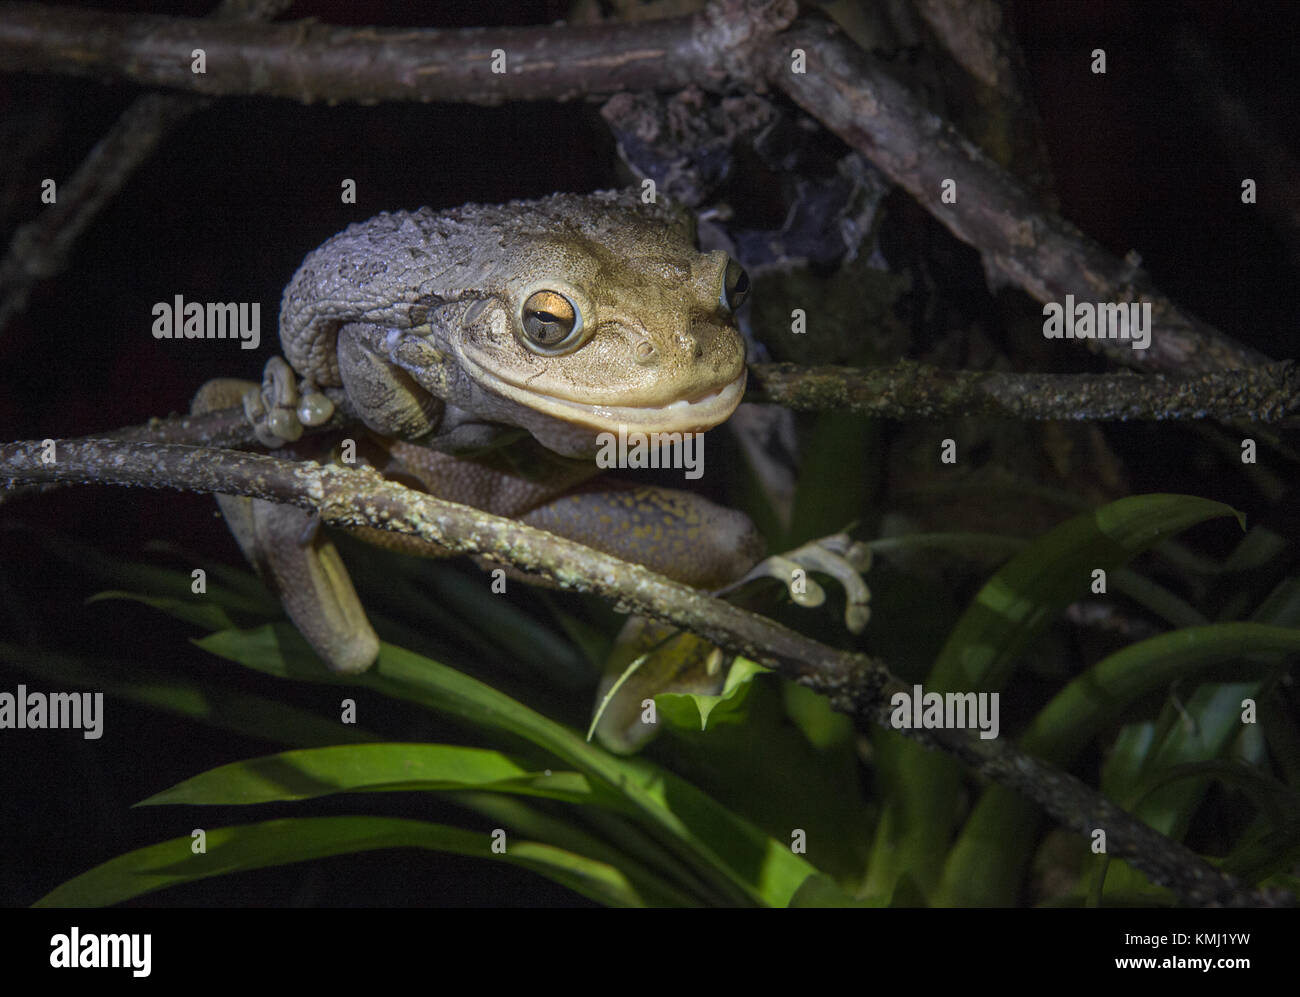 World's Biggest Cuban Tree Frog at night .The Cuban tree frog ( Osteopilus septentrionalis ) . Cuba in natural habitat Stock Photo